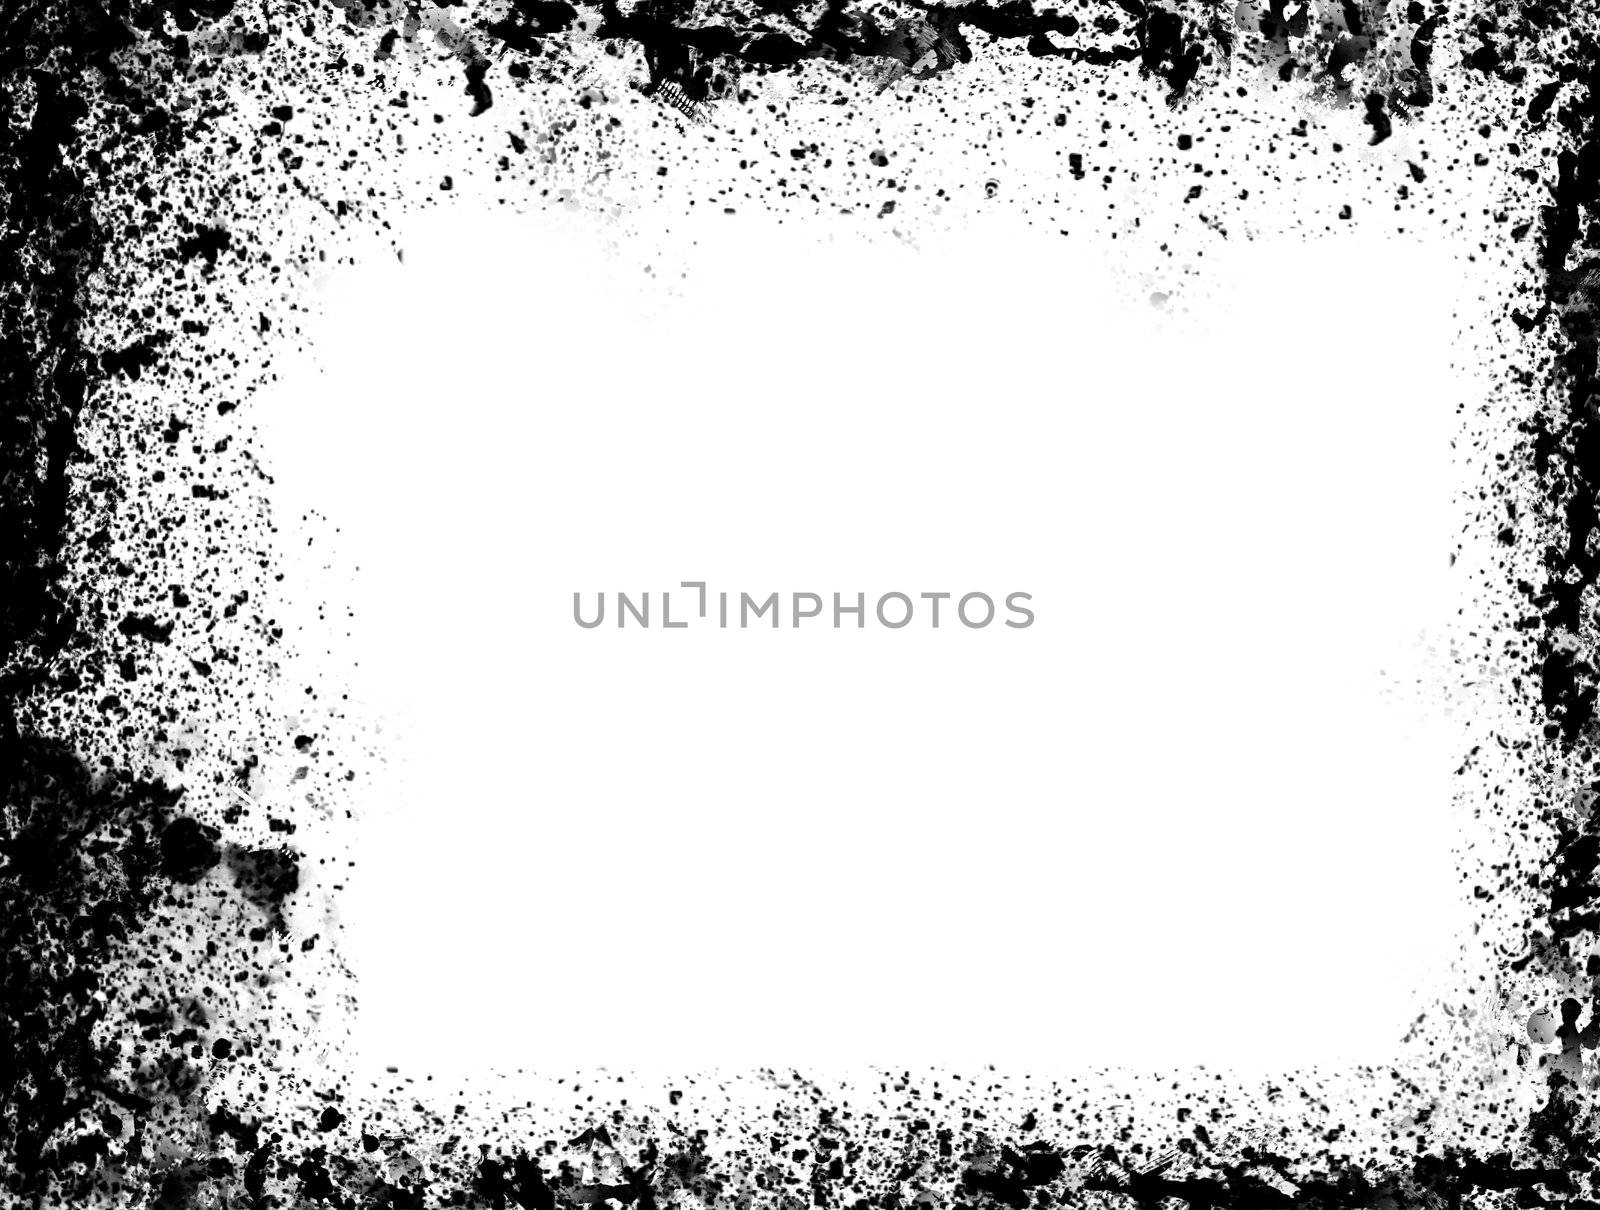 Simple black and grey on white spatter grunge border